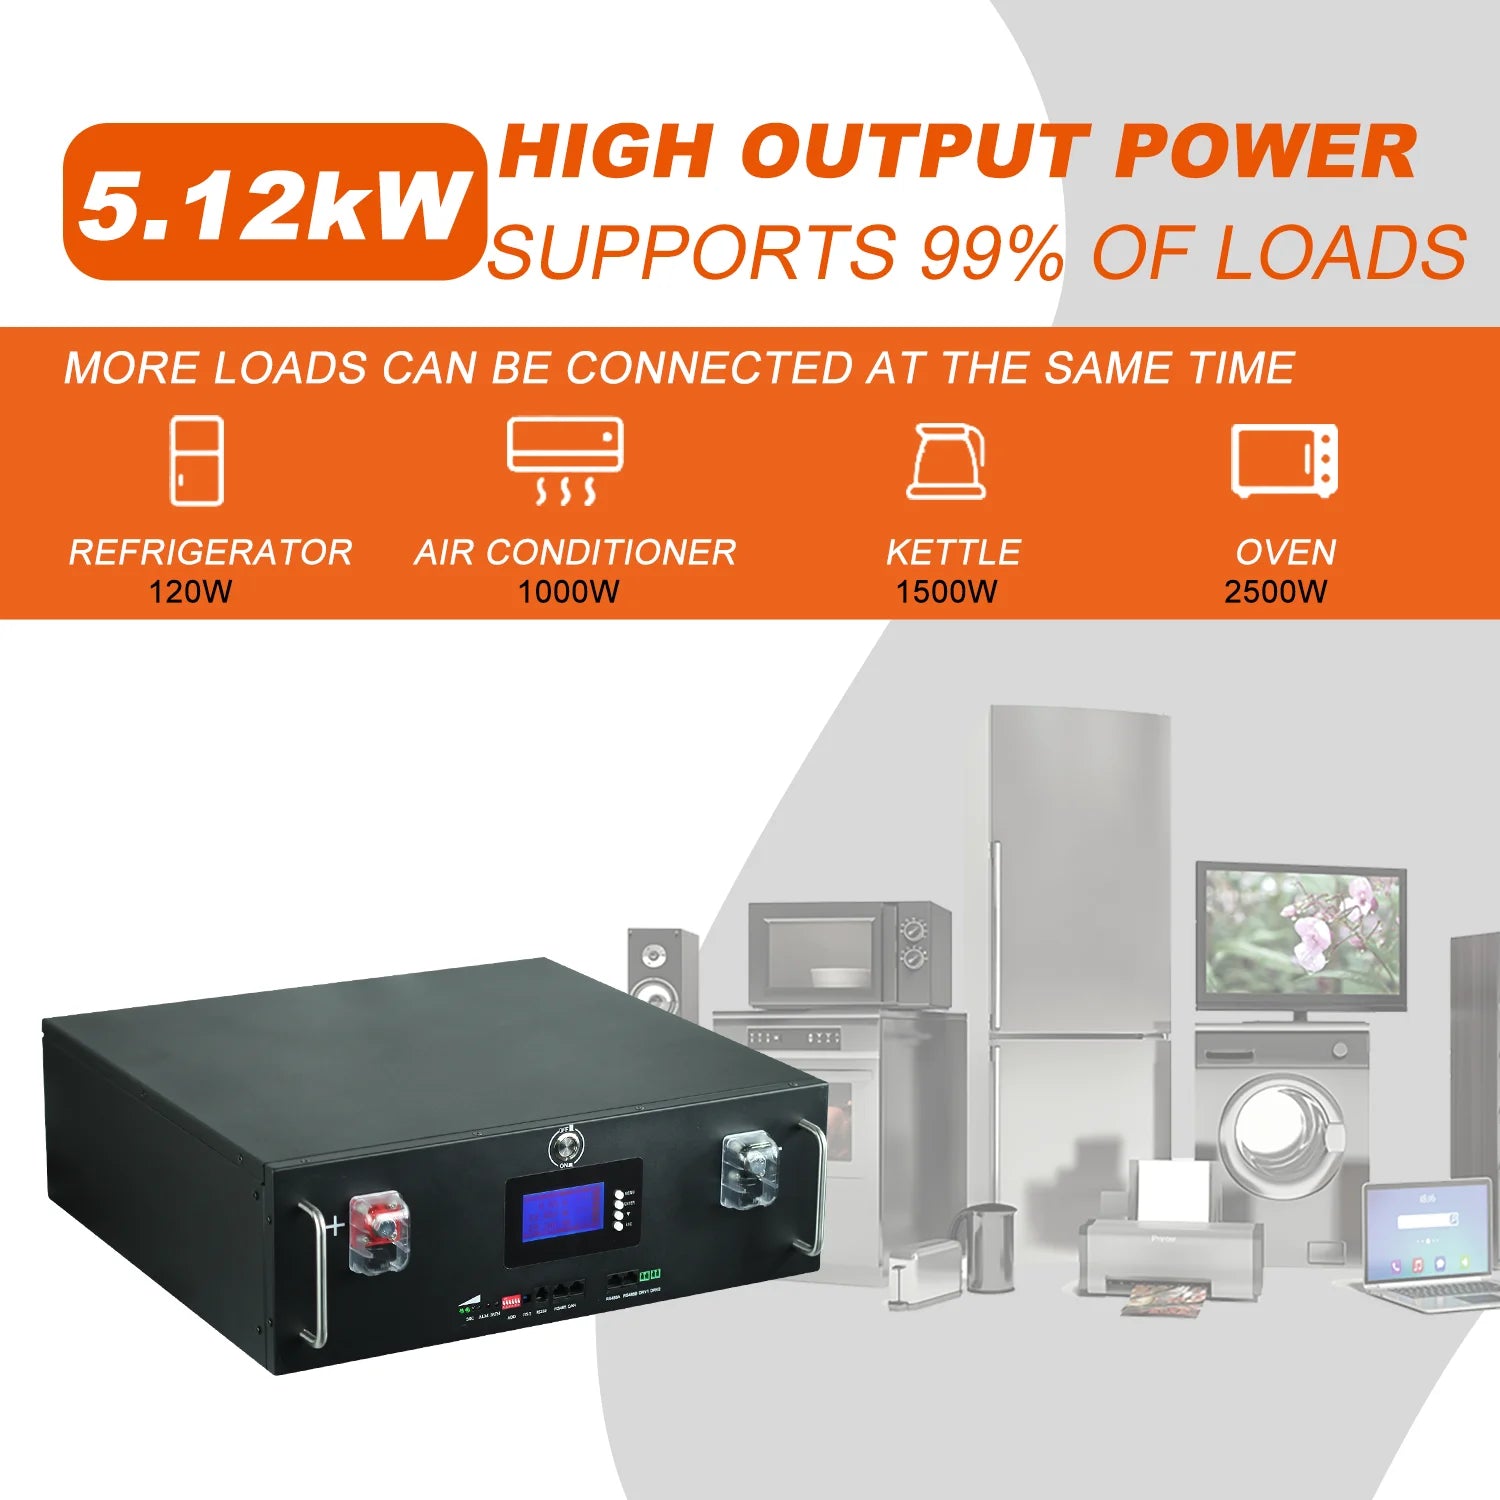 New 48V 100Ah LiFePo4 Battery, High-power inverter: Supports most appliances (up to 120-2500W)